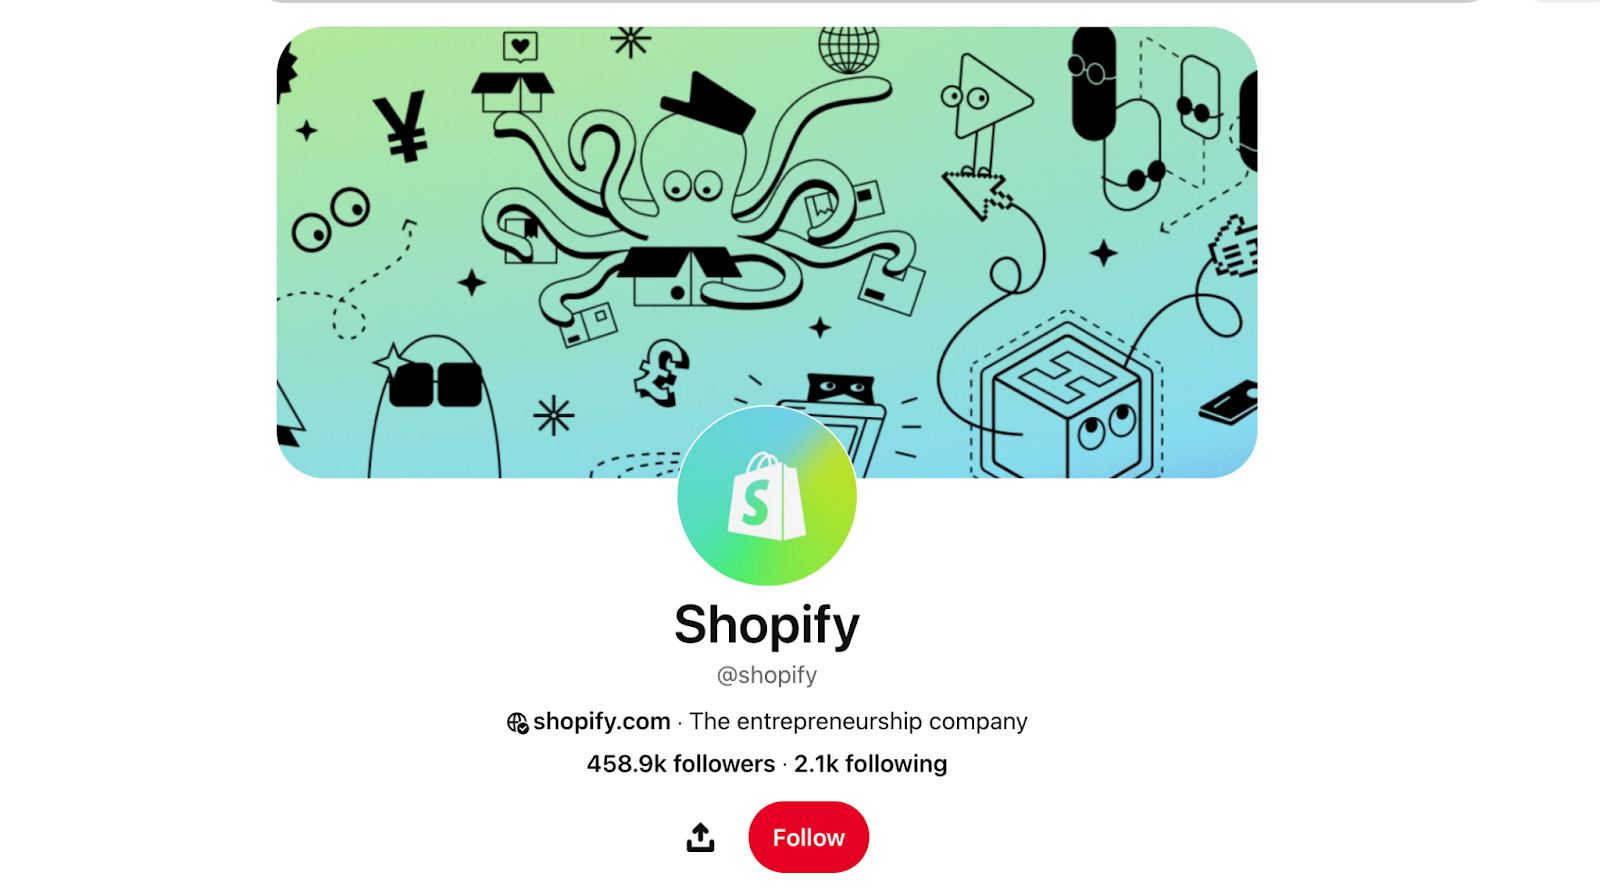 Shopify's Pinterest page has nearly 460,000 followers